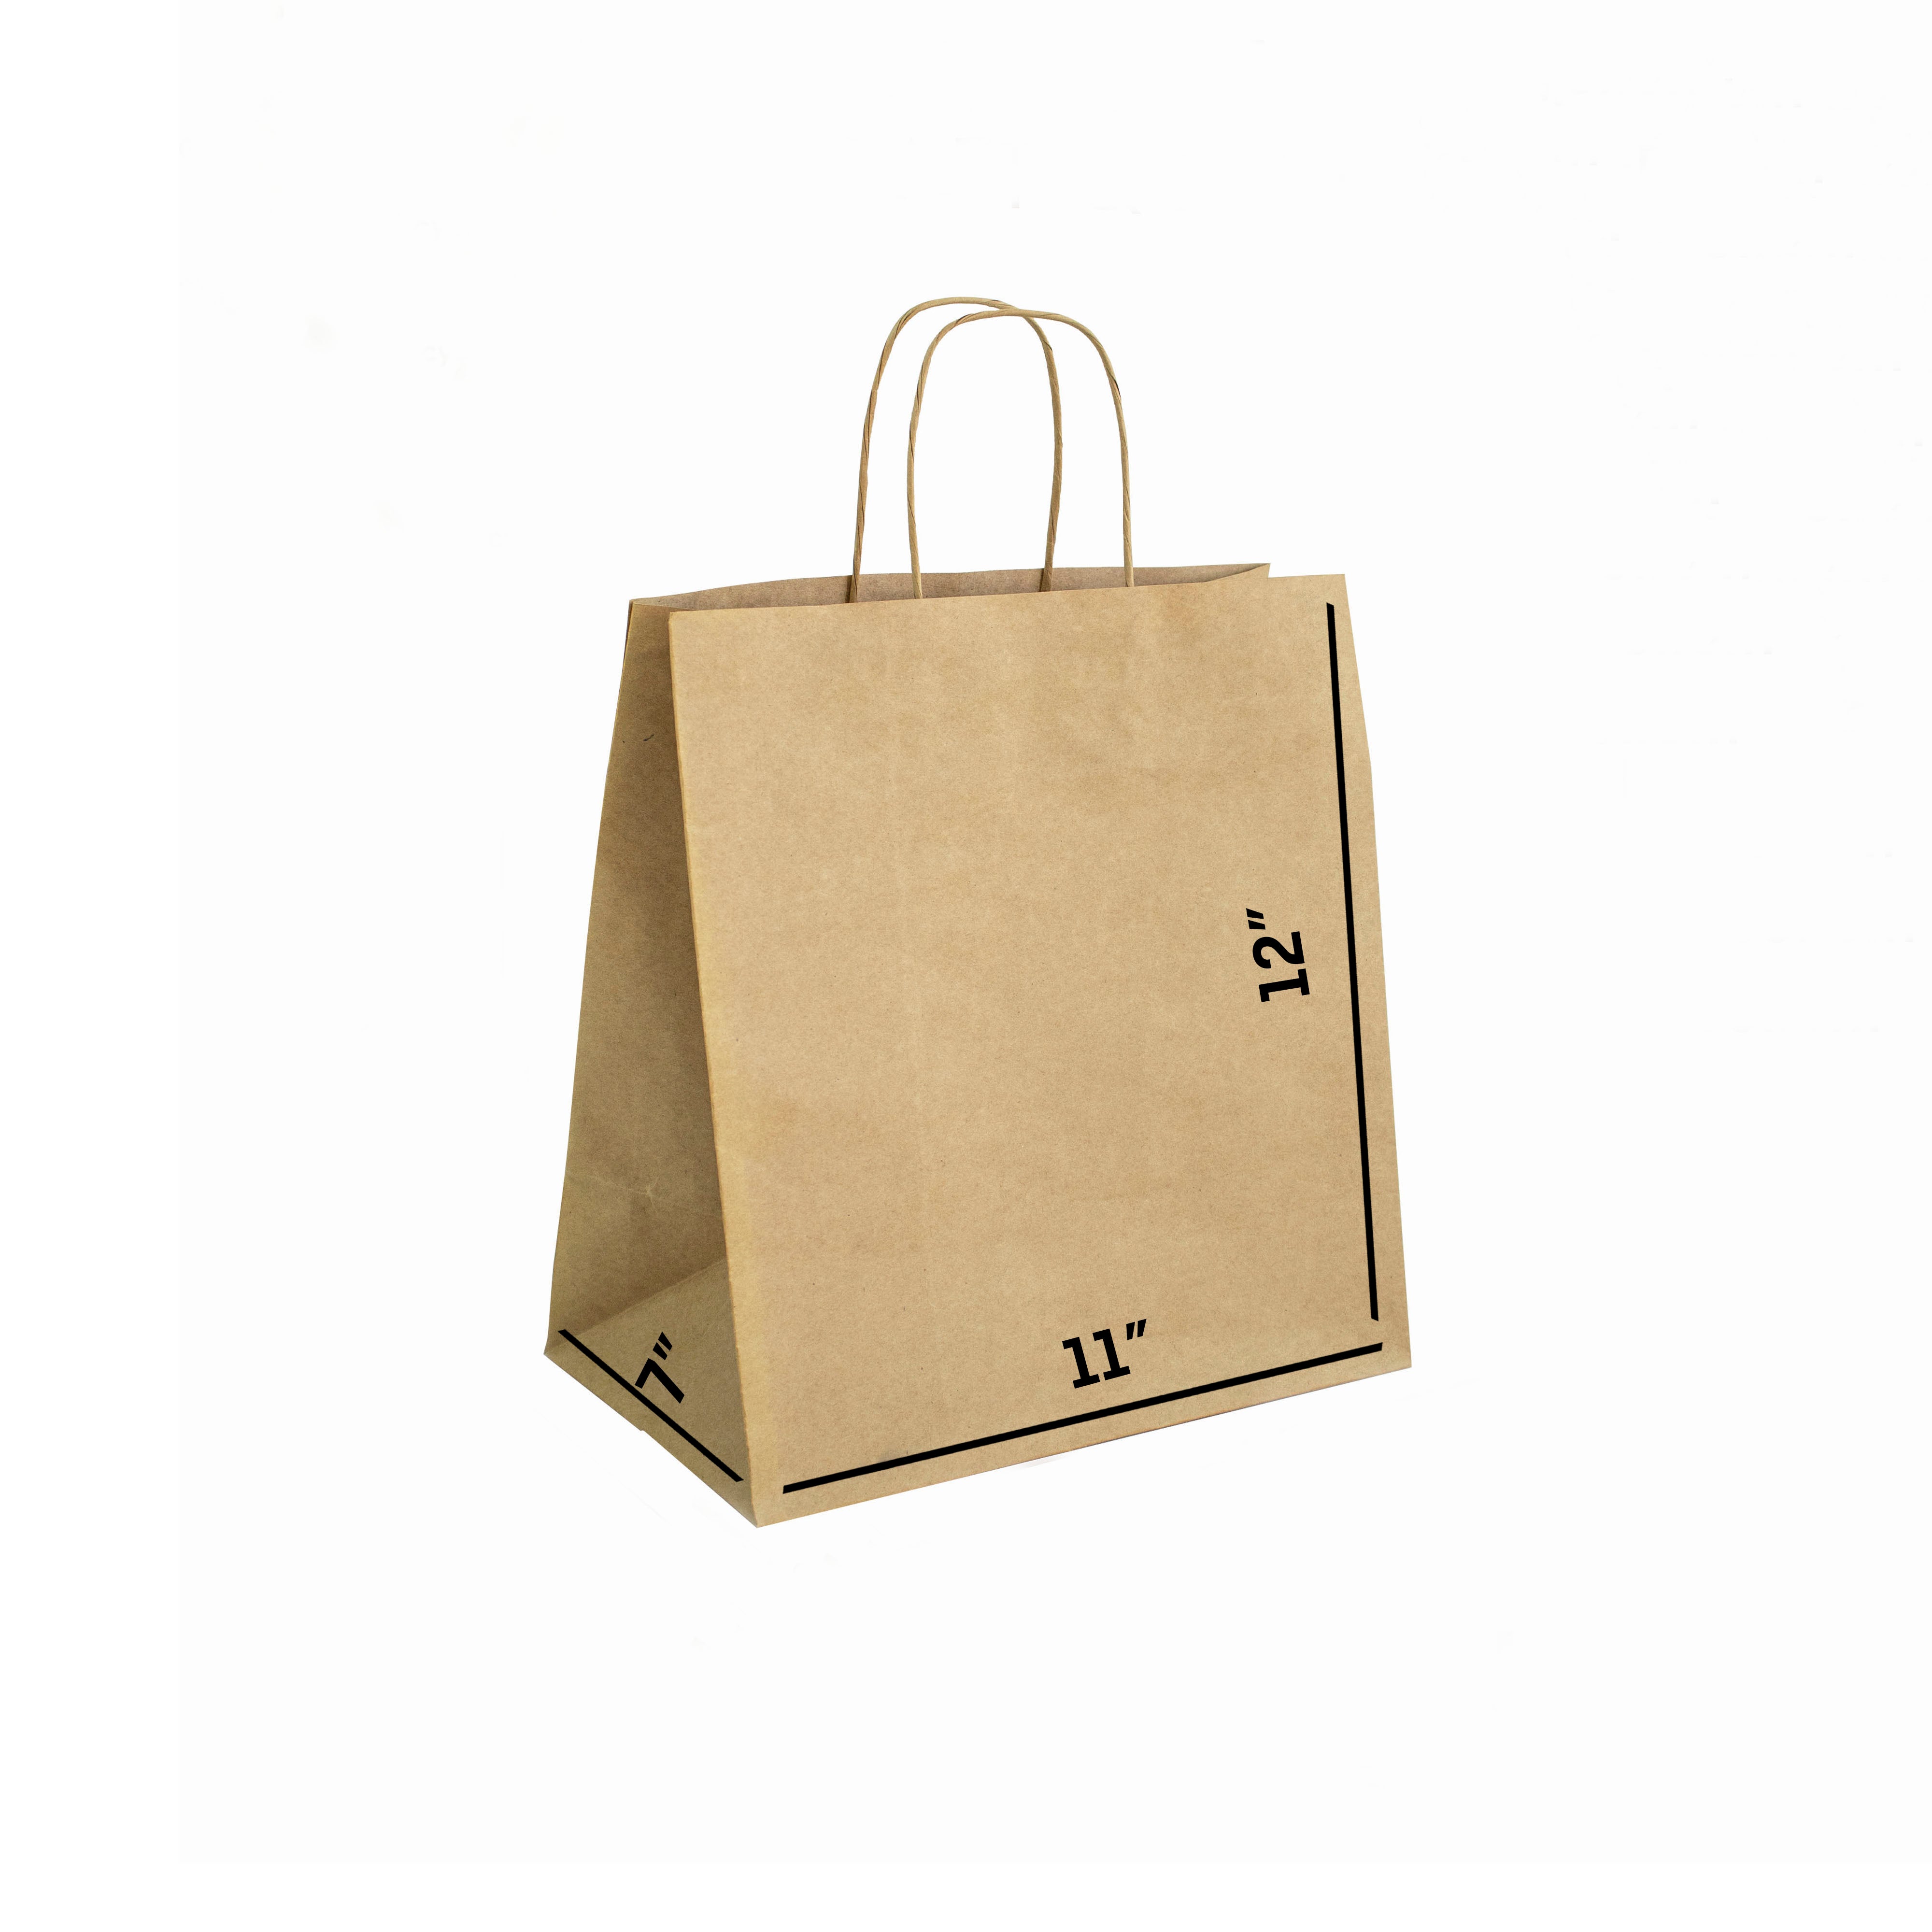 BROWN Paper Bags with Twisted Handles -TARA- 11